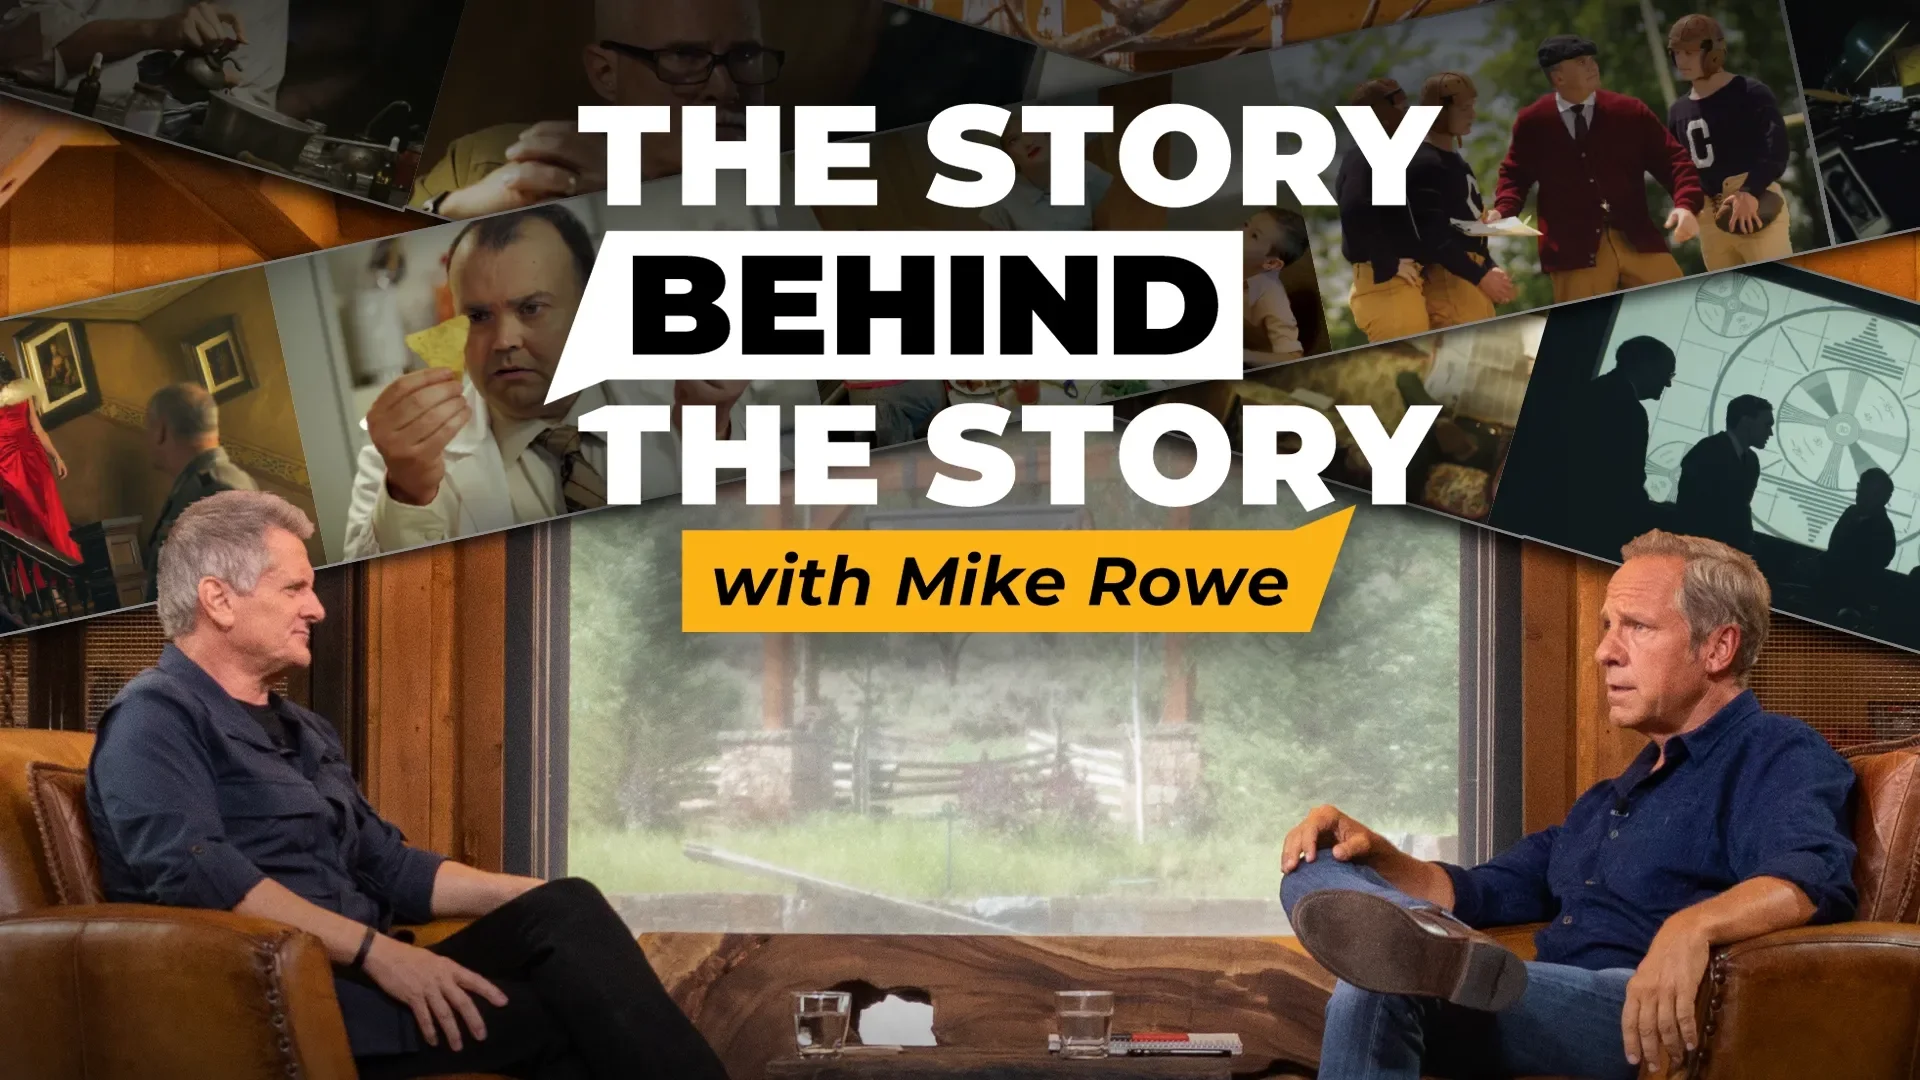 The Story Behind the Story with Mike Rowe